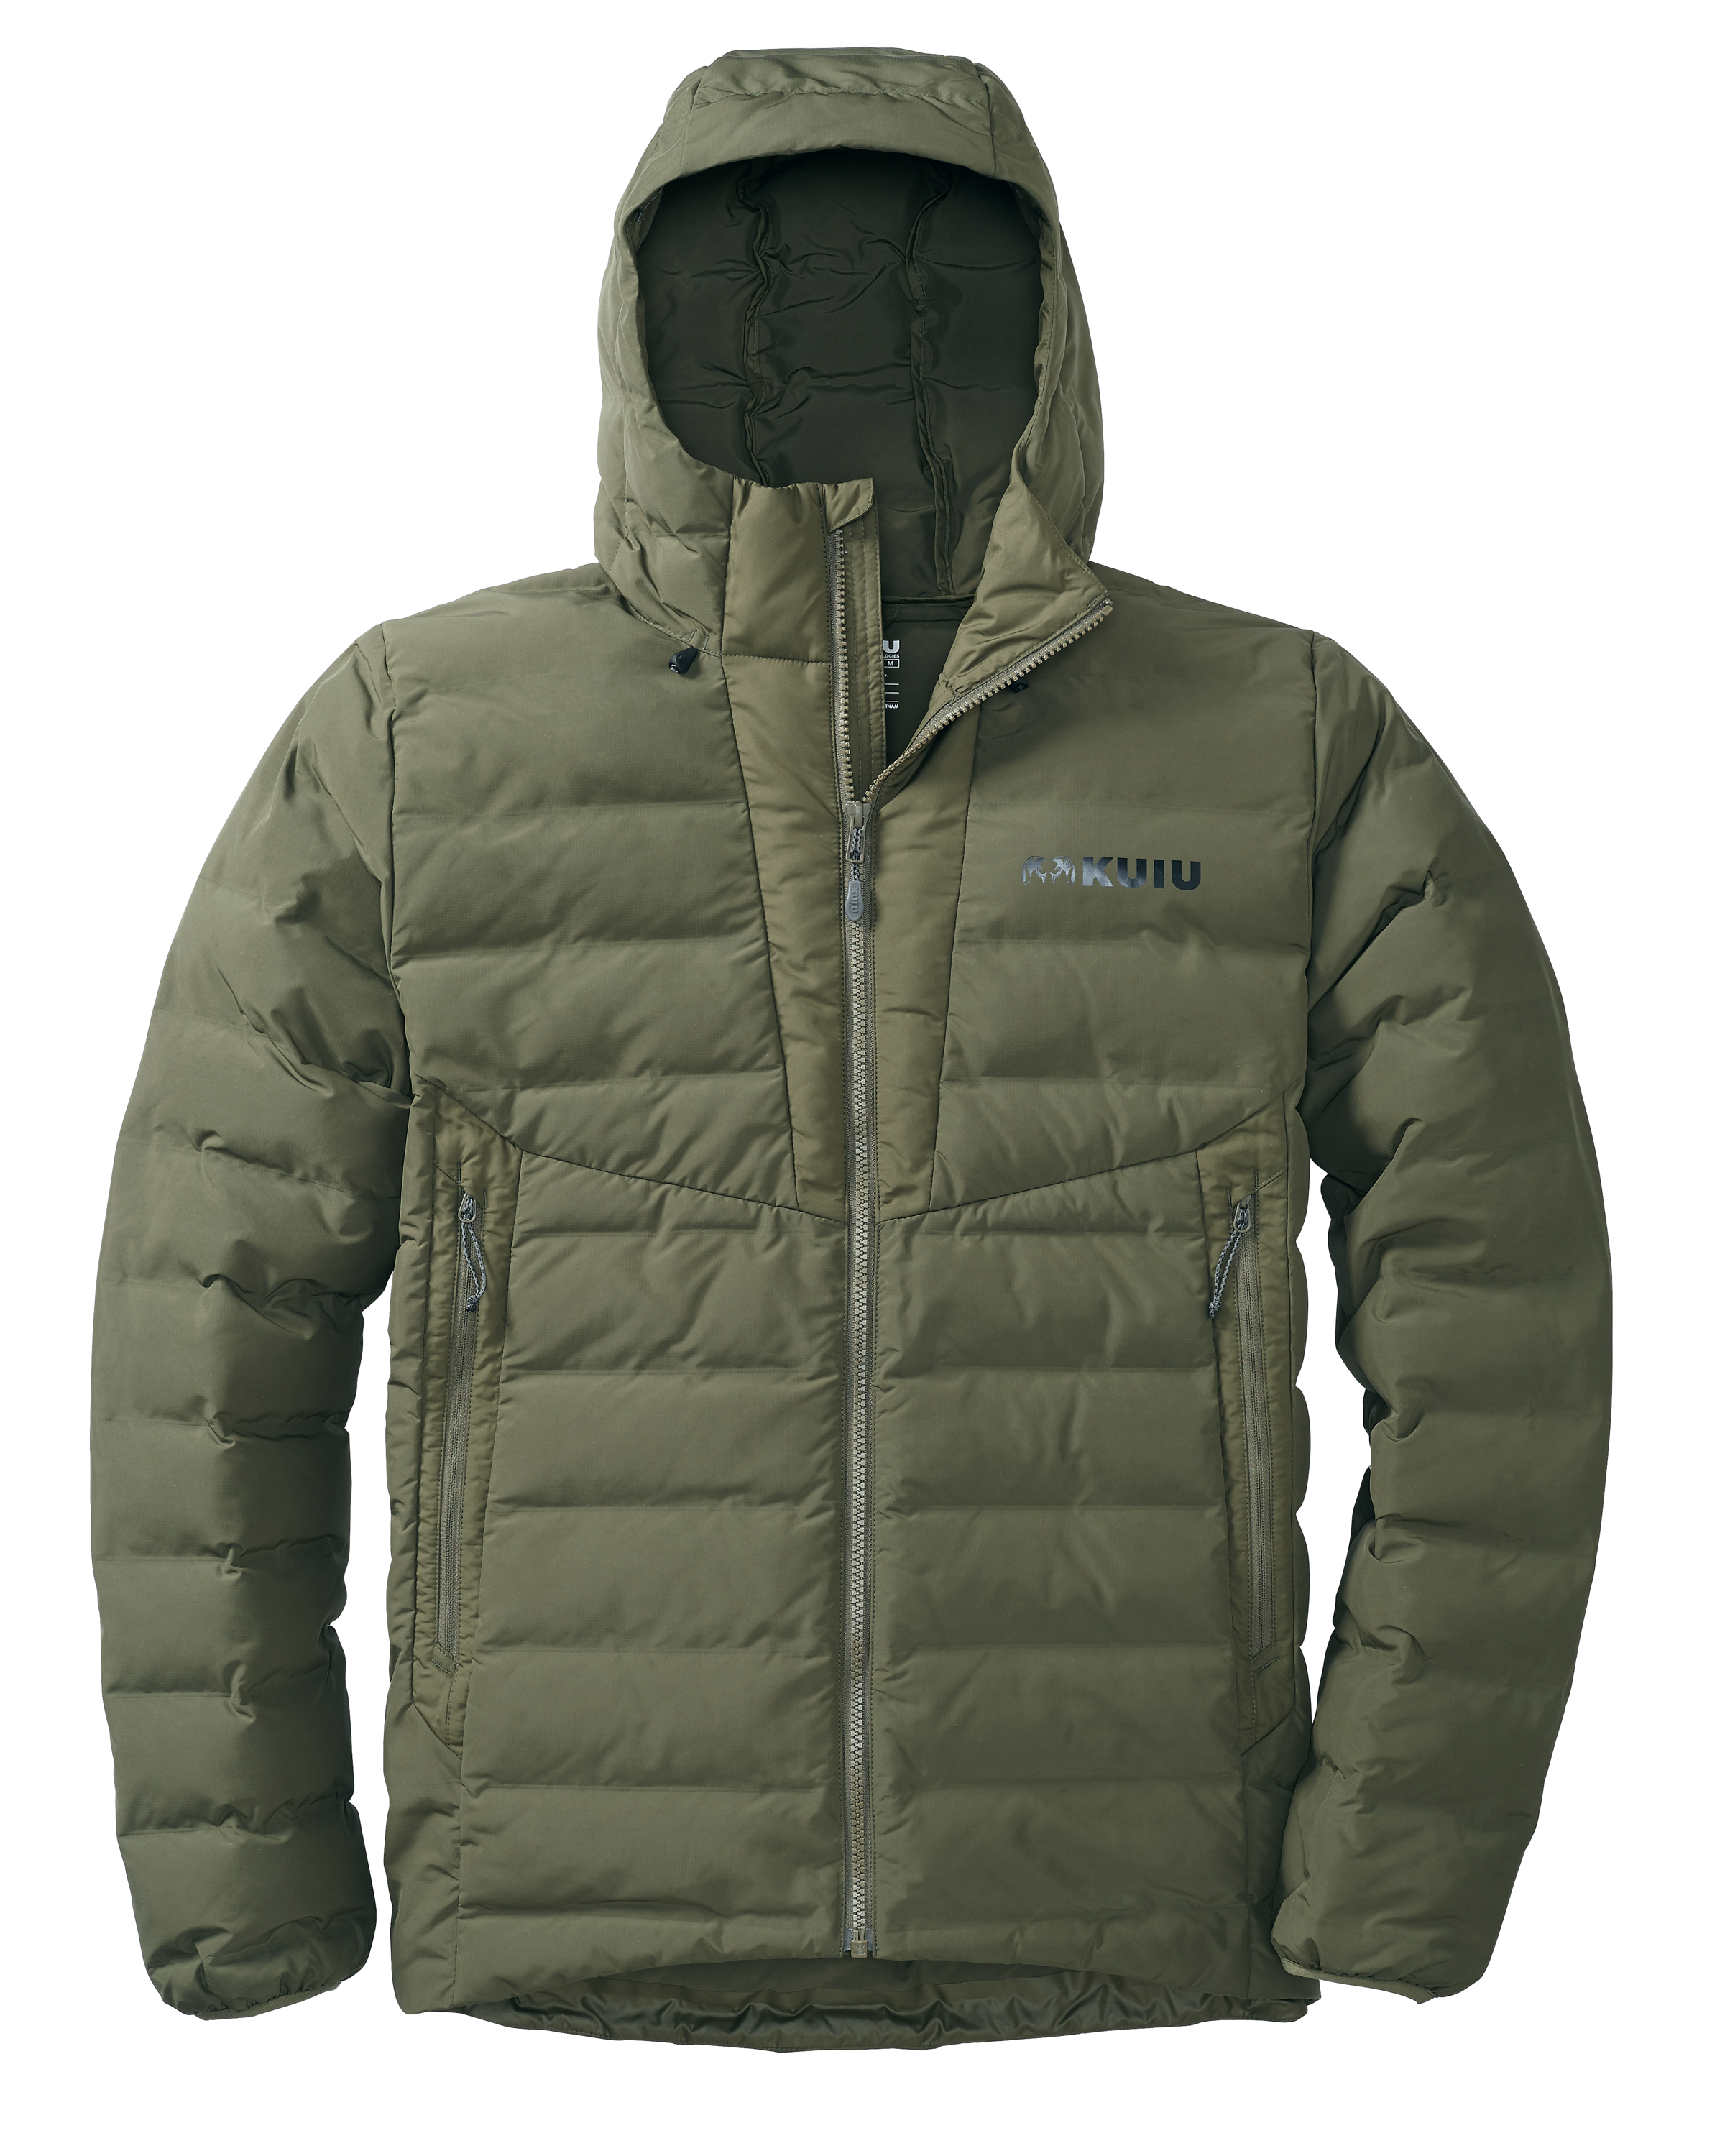 KUIU Elements Hooded Hunting Jacket in Olive | Size 3XL